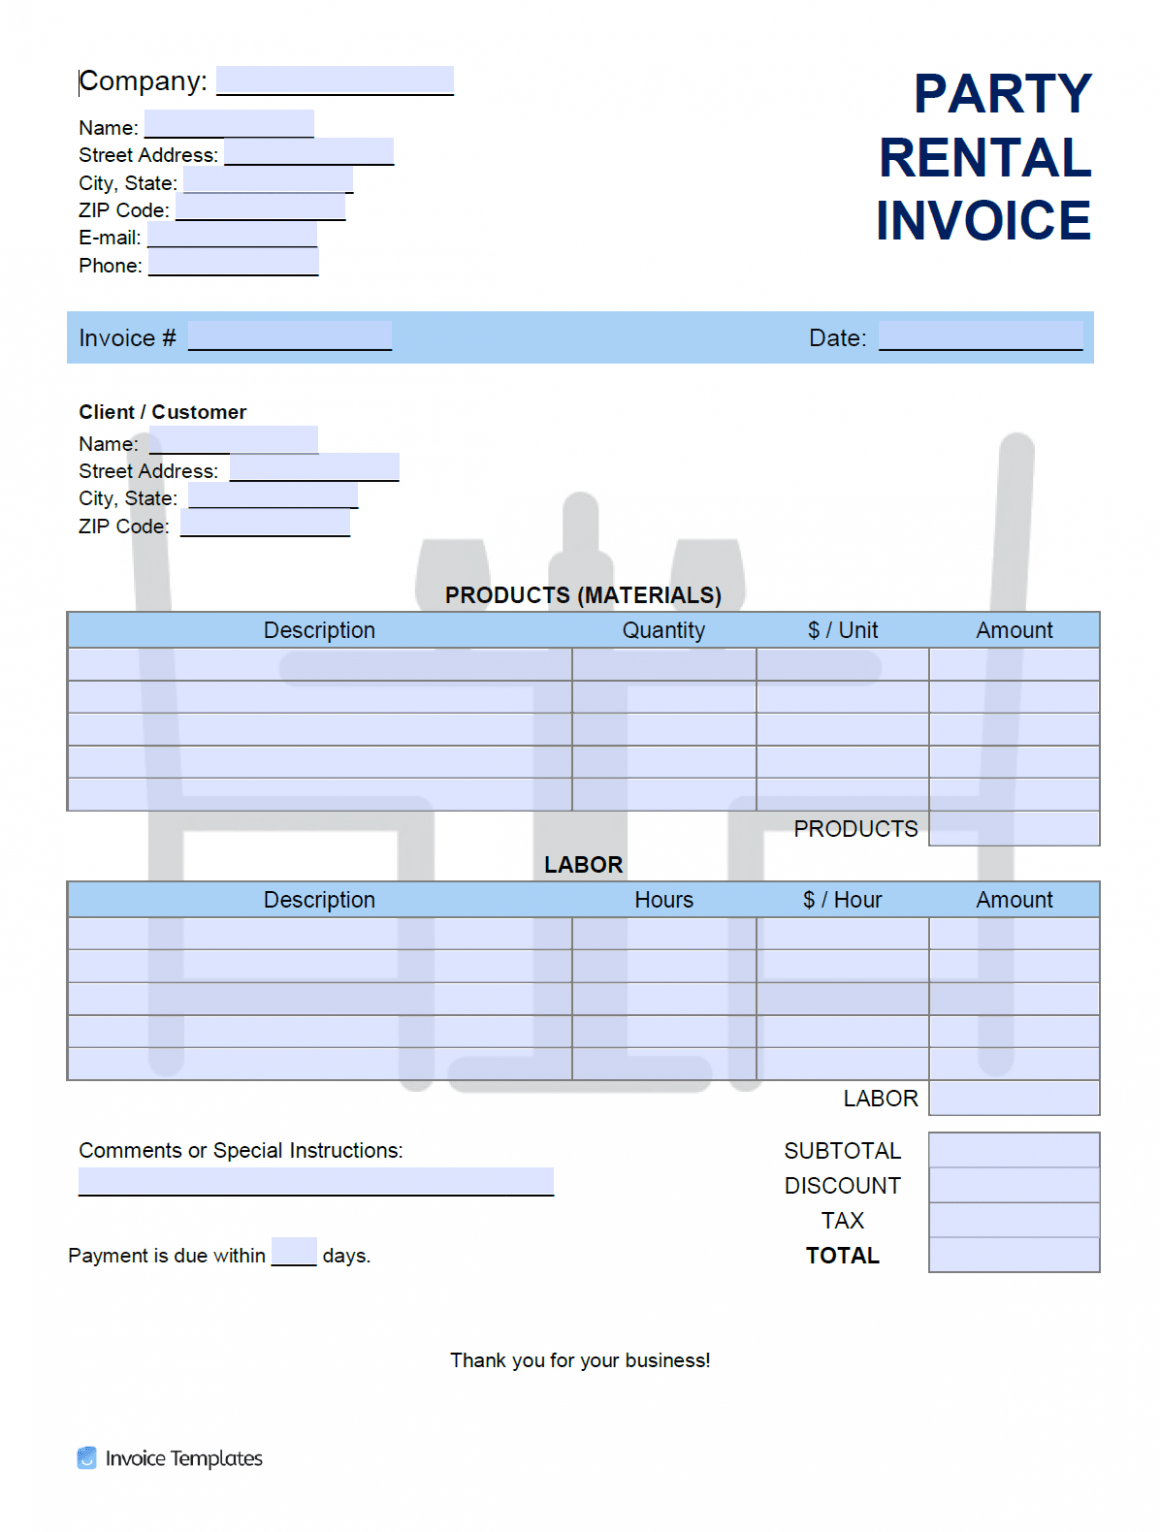 Editable Party Rental Invoice Template Excel